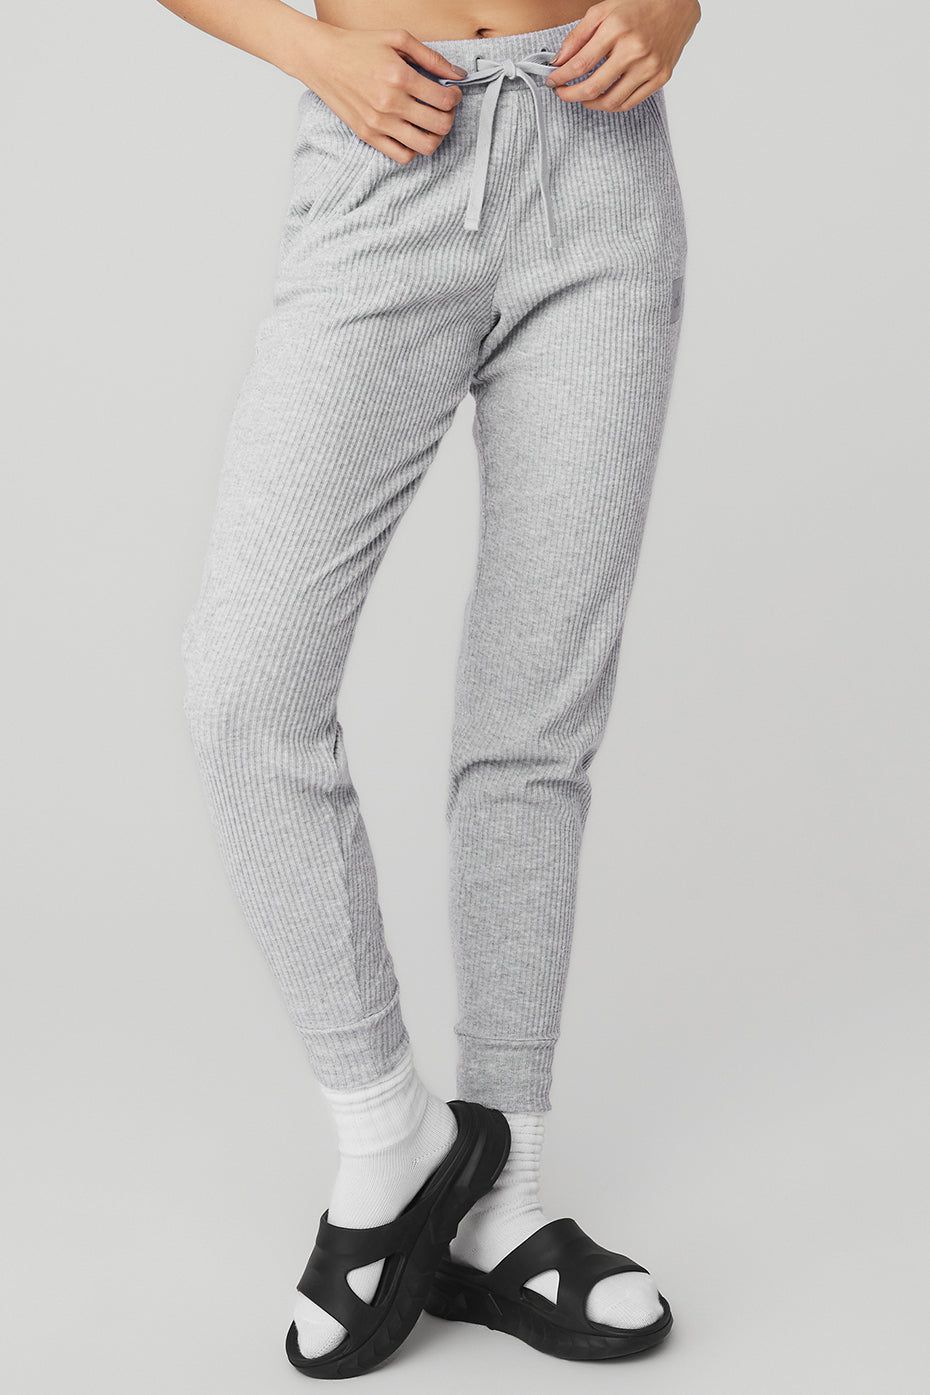 22 Best Sweatpants for Women 2023, Tested by Clothing Experts